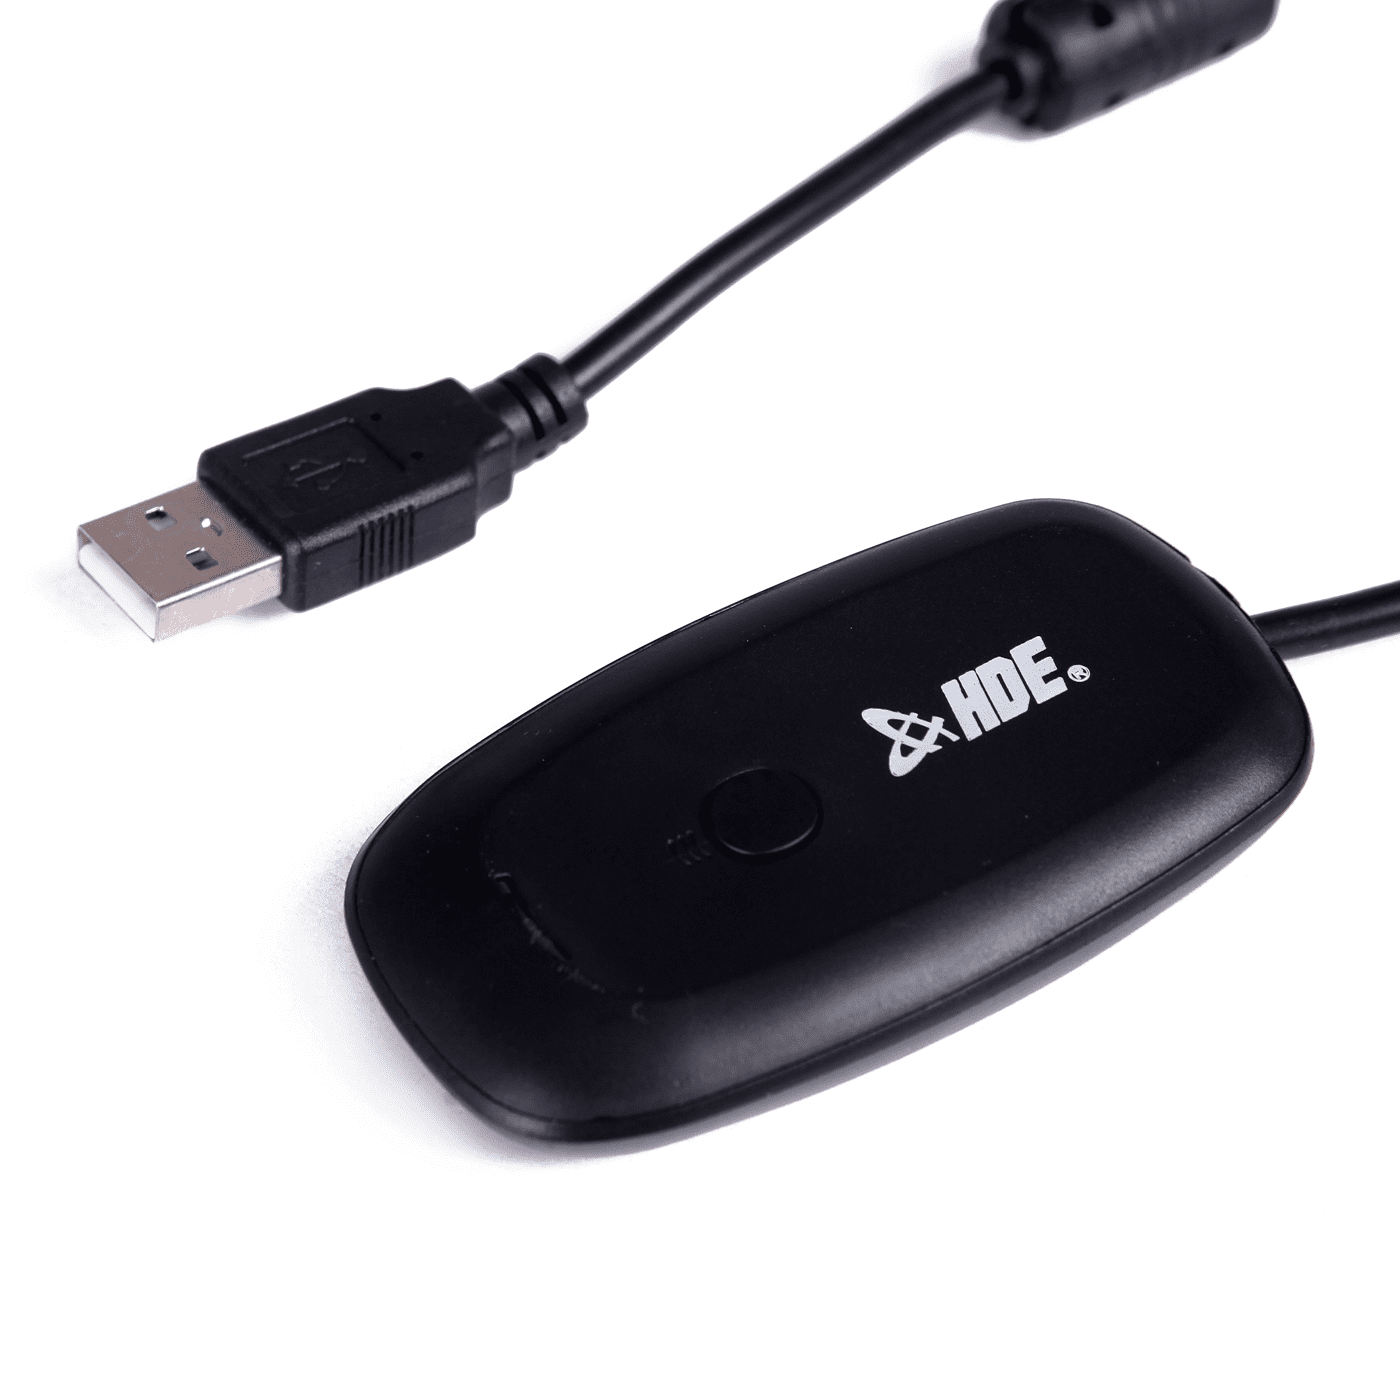 xbox controller wireless adapter for pc how to setup